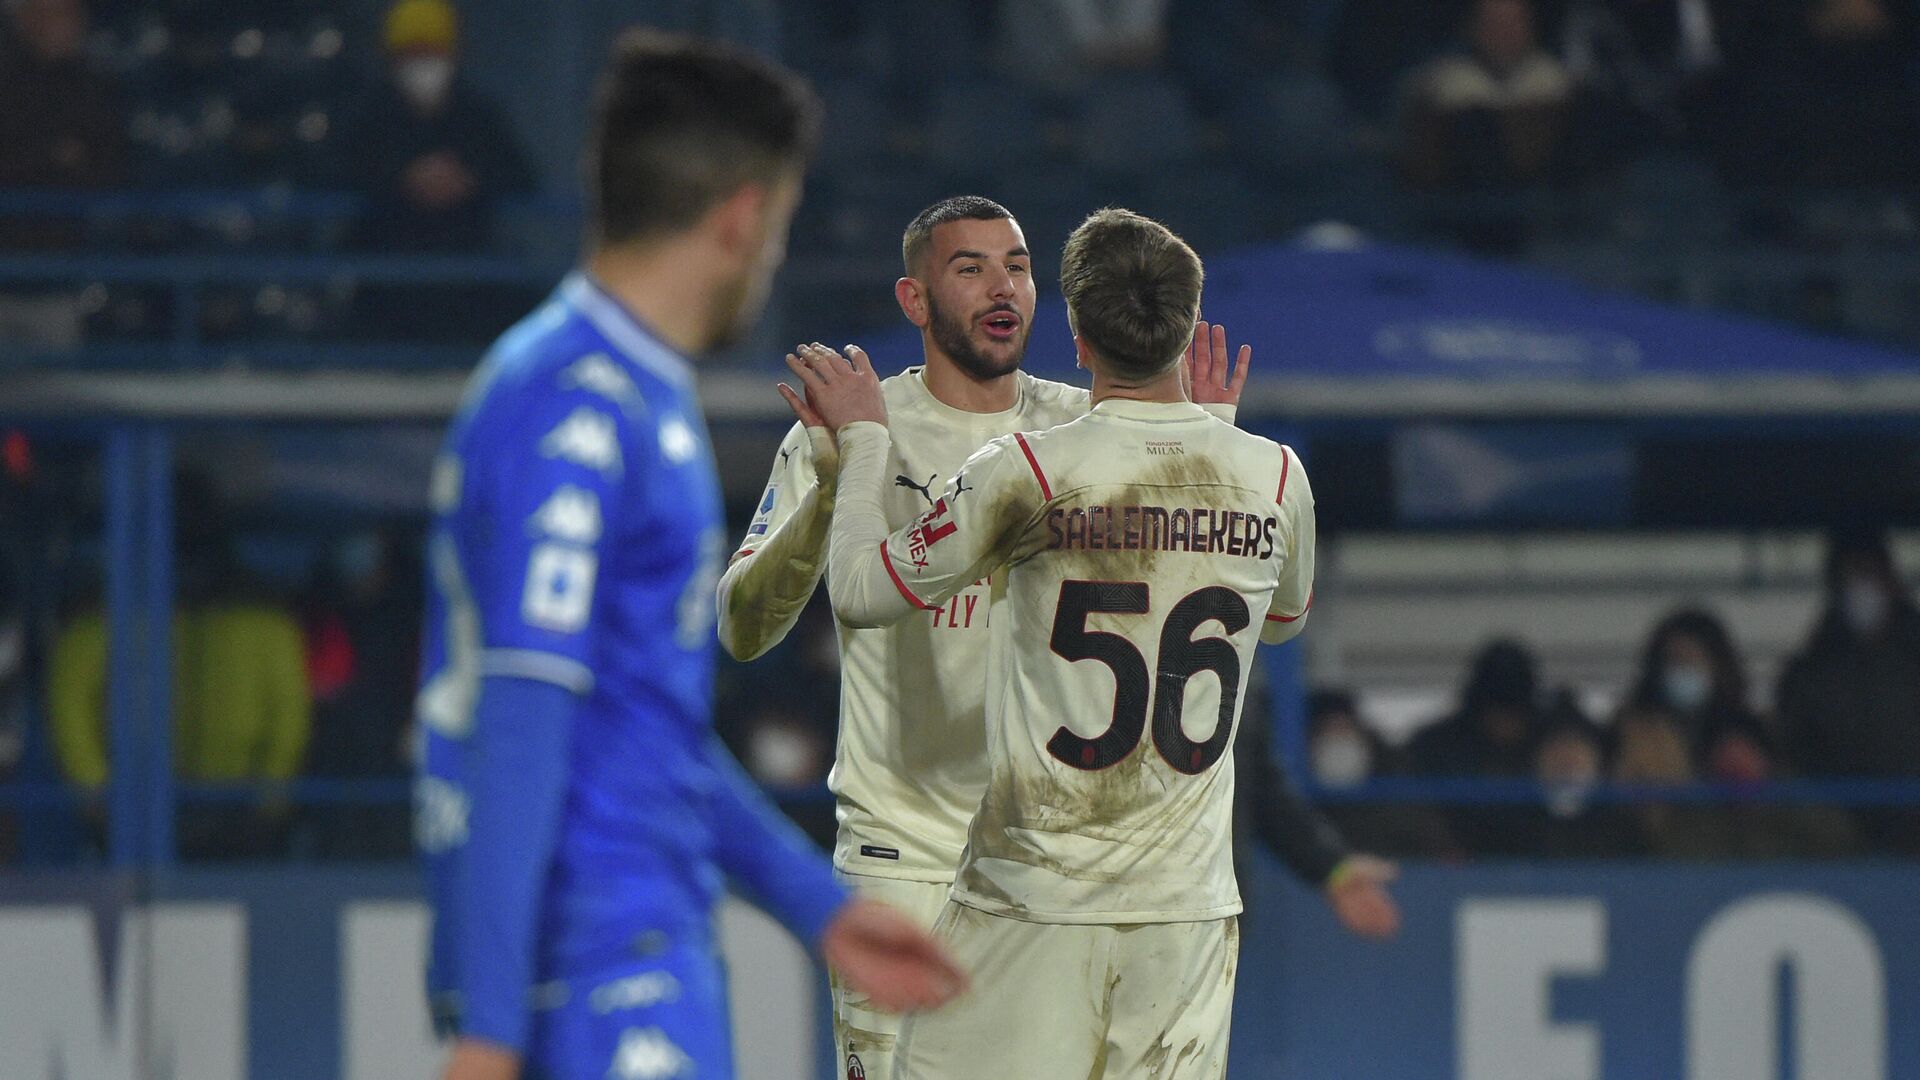 AC Milan's French defender Theo Hernandez (Rear C) celebrates with AC Milan's Belgian midfielder Alexis Saelemaekers after scoring his side's fourth goal during the Italian Serie A football match between Empoli and AC Milan on December 22, 2021 at the Carlo-Castellani stadium in Empoli. (Photo by Andreas SOLARO / AFP) - РИА Новости, 1920, 23.12.2021